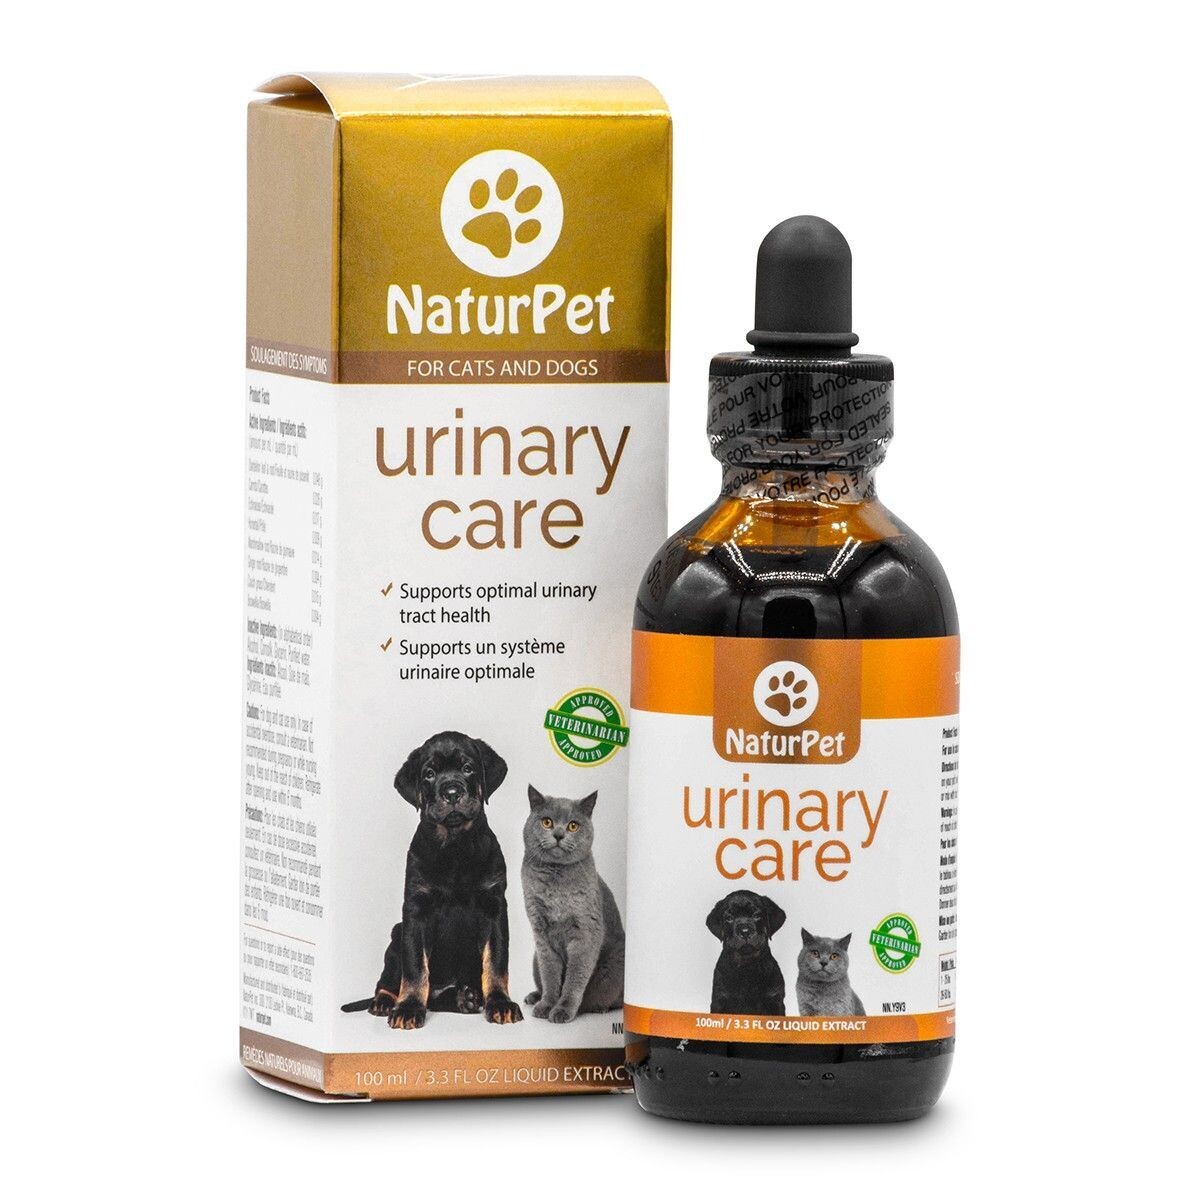 NaturPet Urinary Care for Dogs & Cats